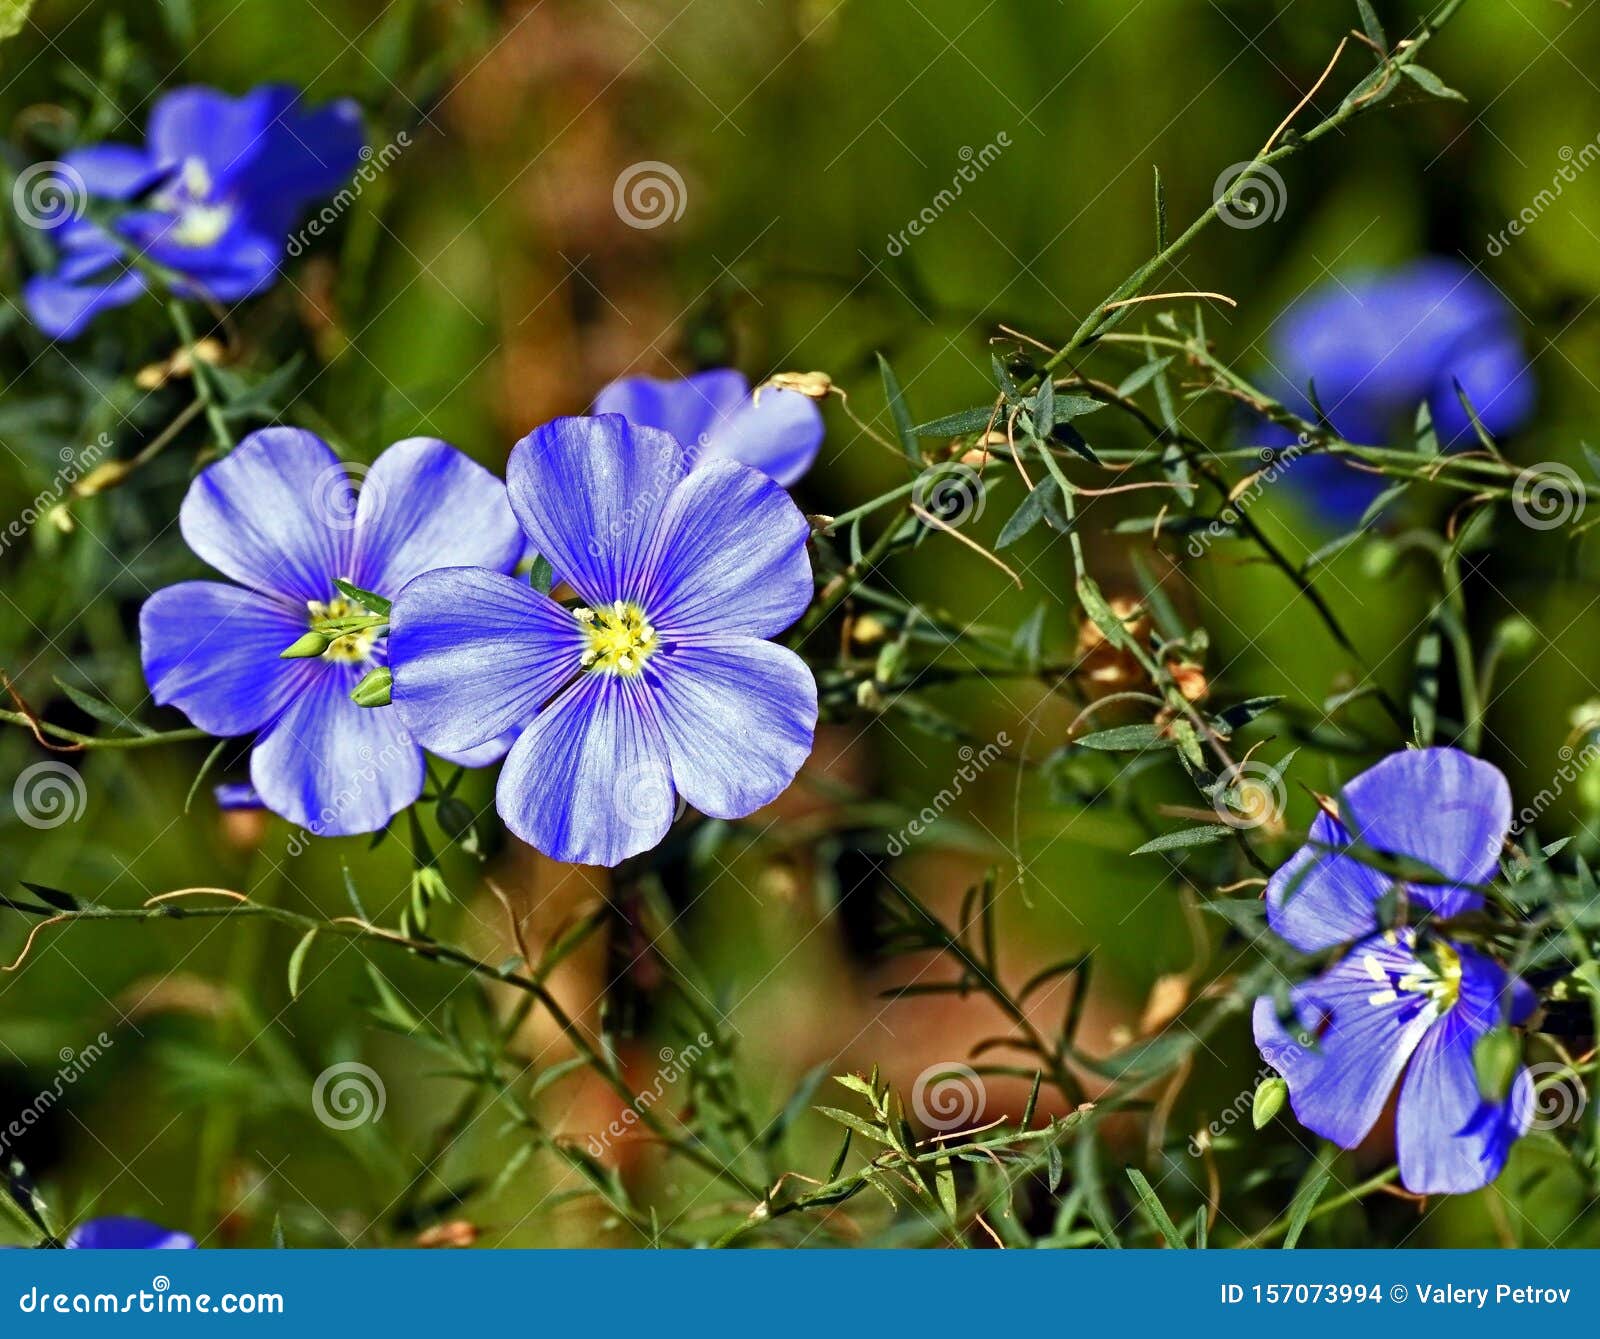 bright blue flowers of the flax, with the latin name linum perenne